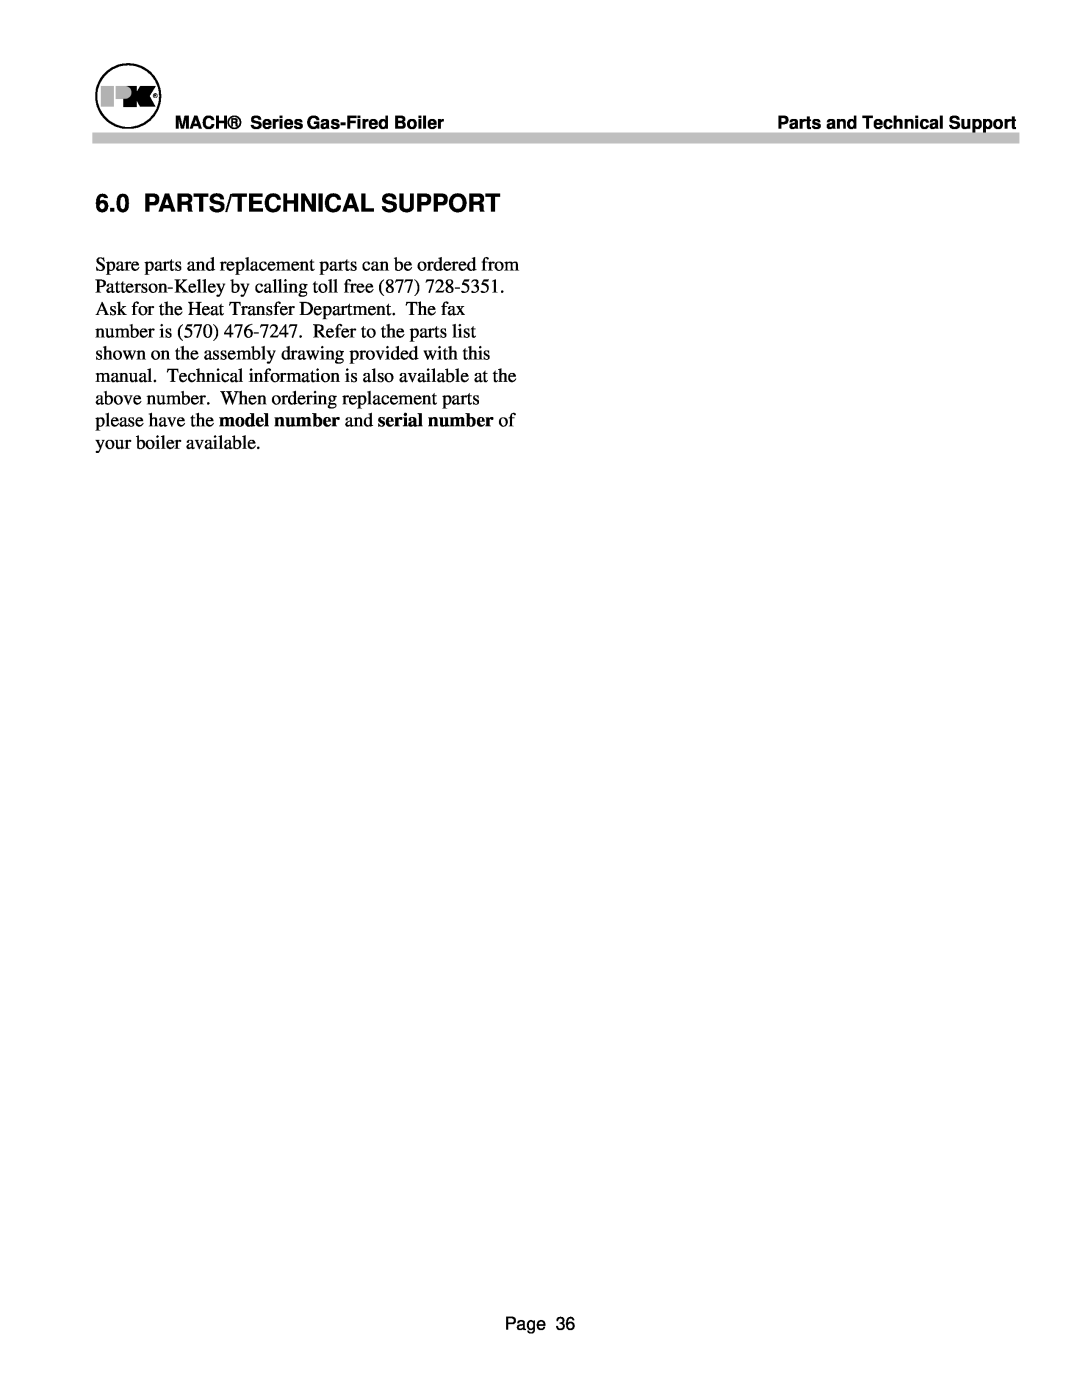 Patterson-Kelley MACH-05 manual Parts/Technical Support, MACH Series Gas-FiredBoiler, Parts and Technical Support 